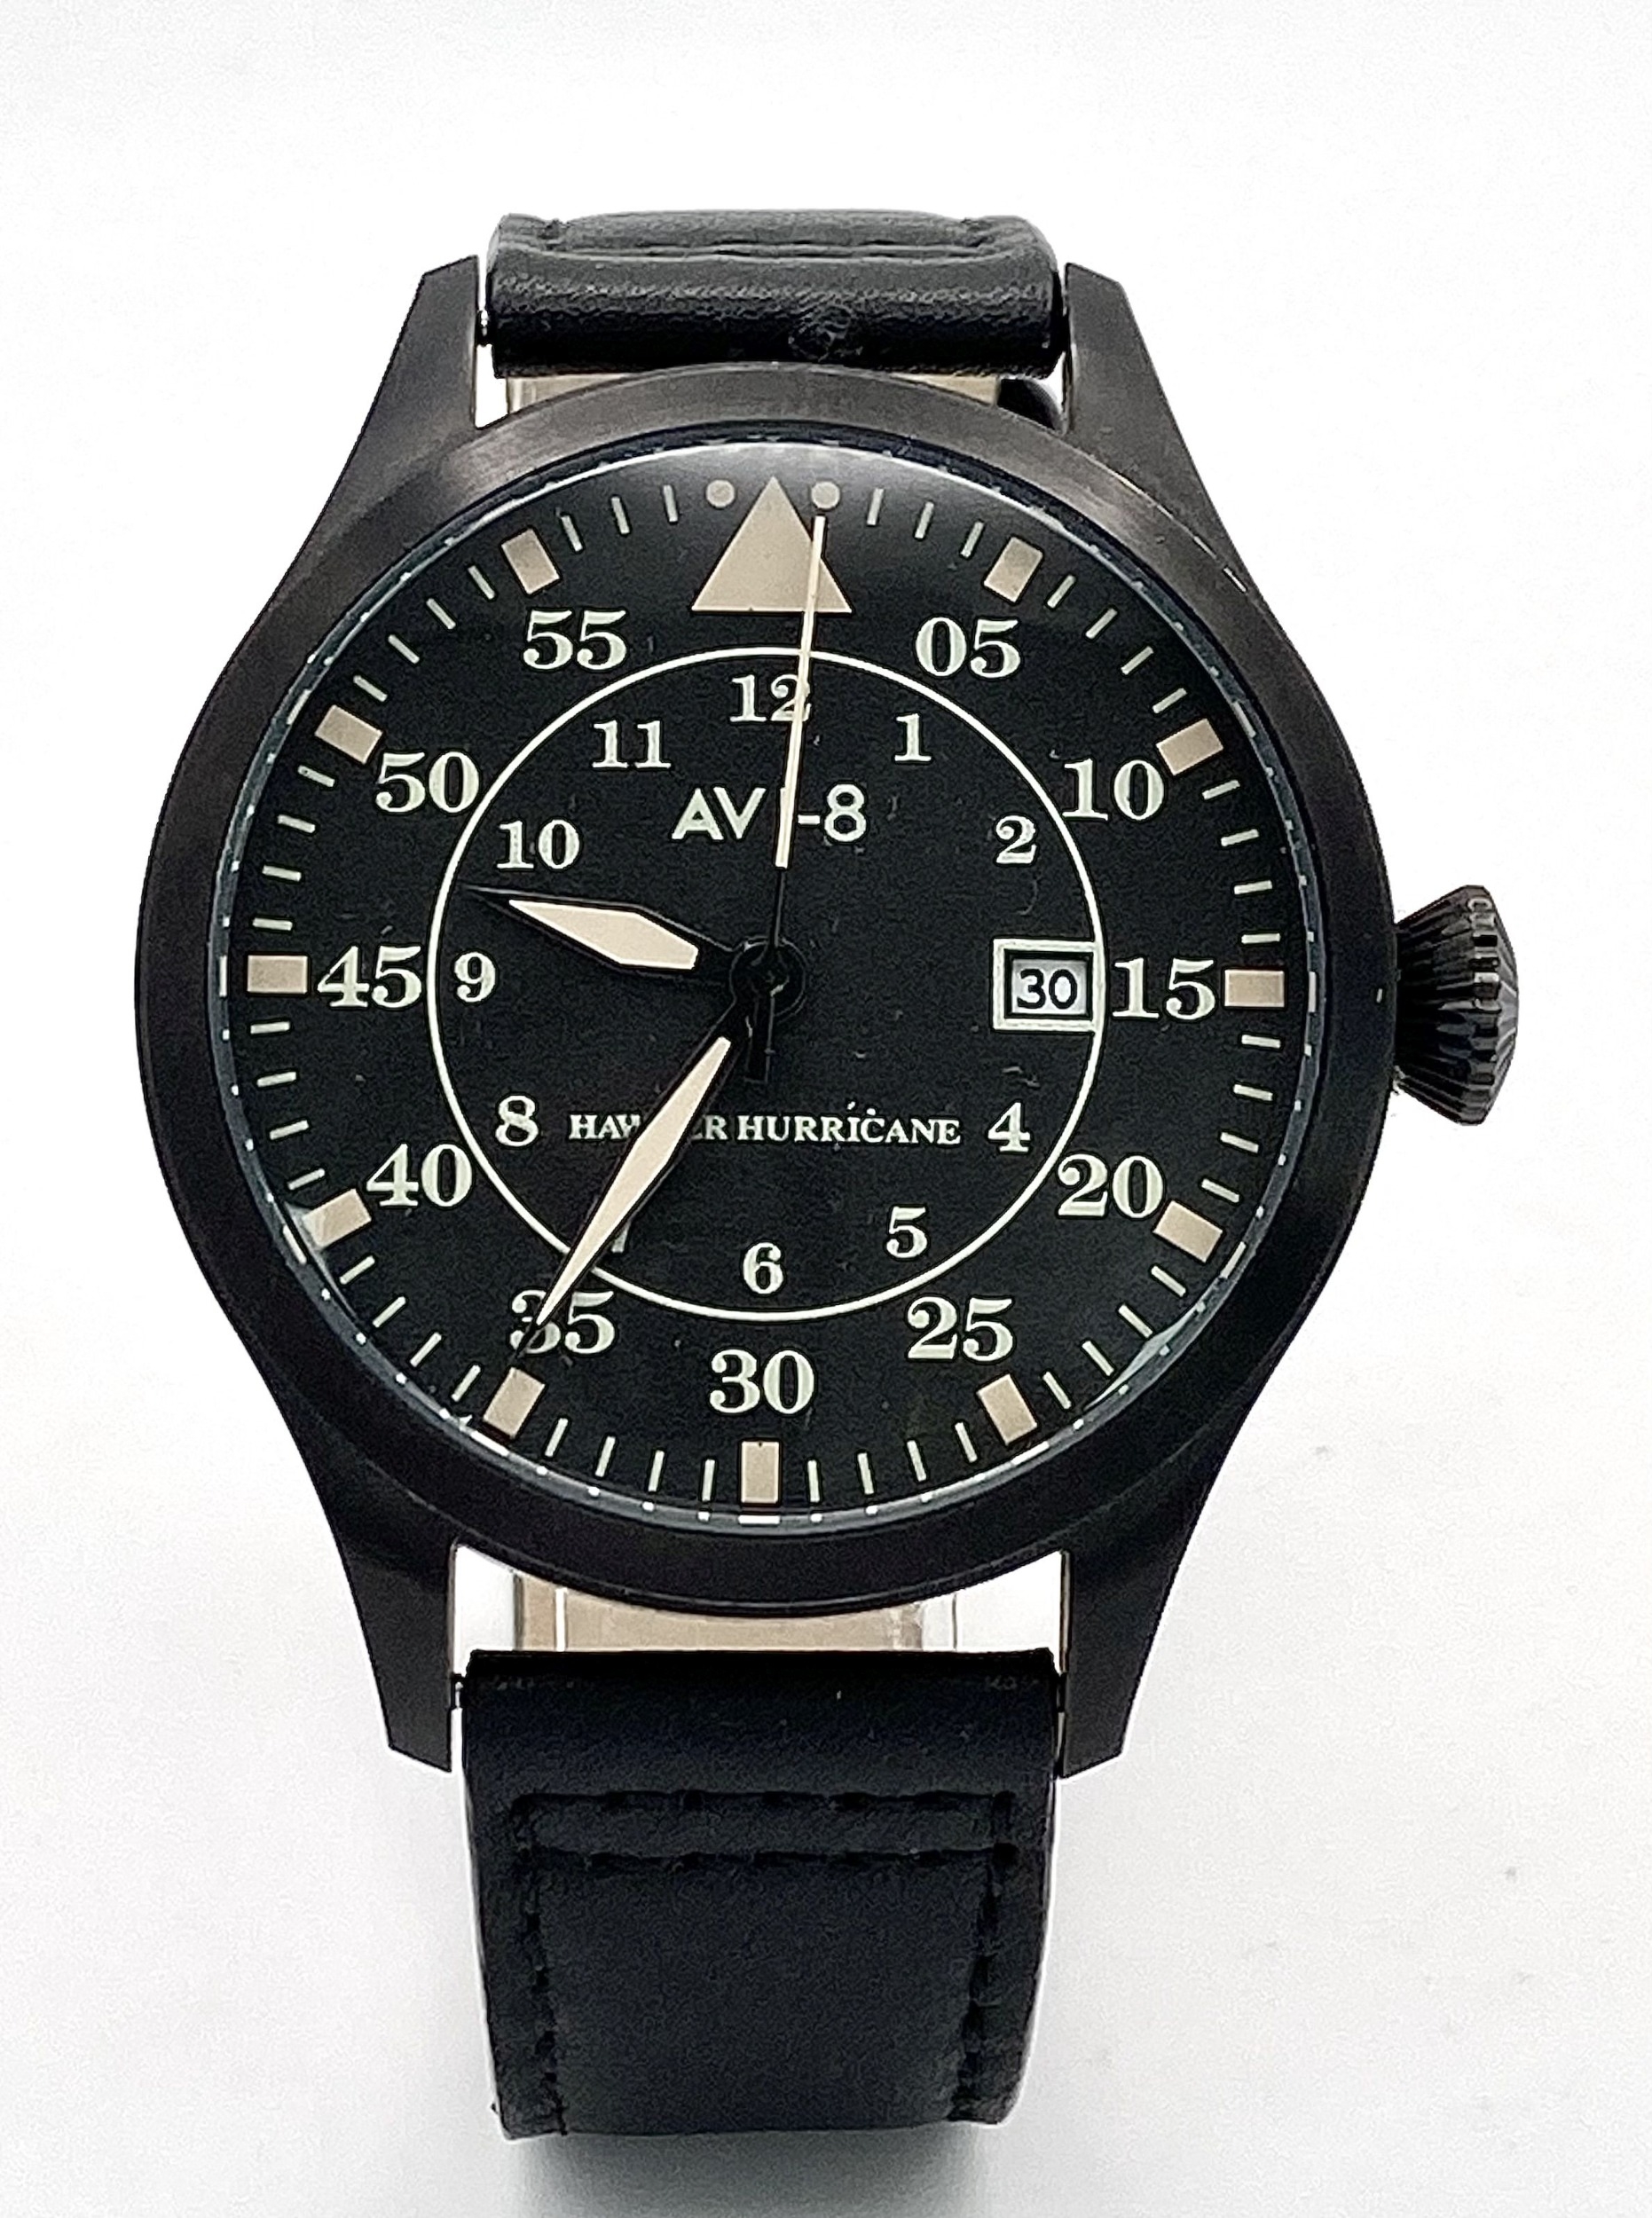 A Men’s Limited Run ‘Hawker Hurricane’ Pilots Date Watch by AVI8. 50mm Including Crown. Full Working